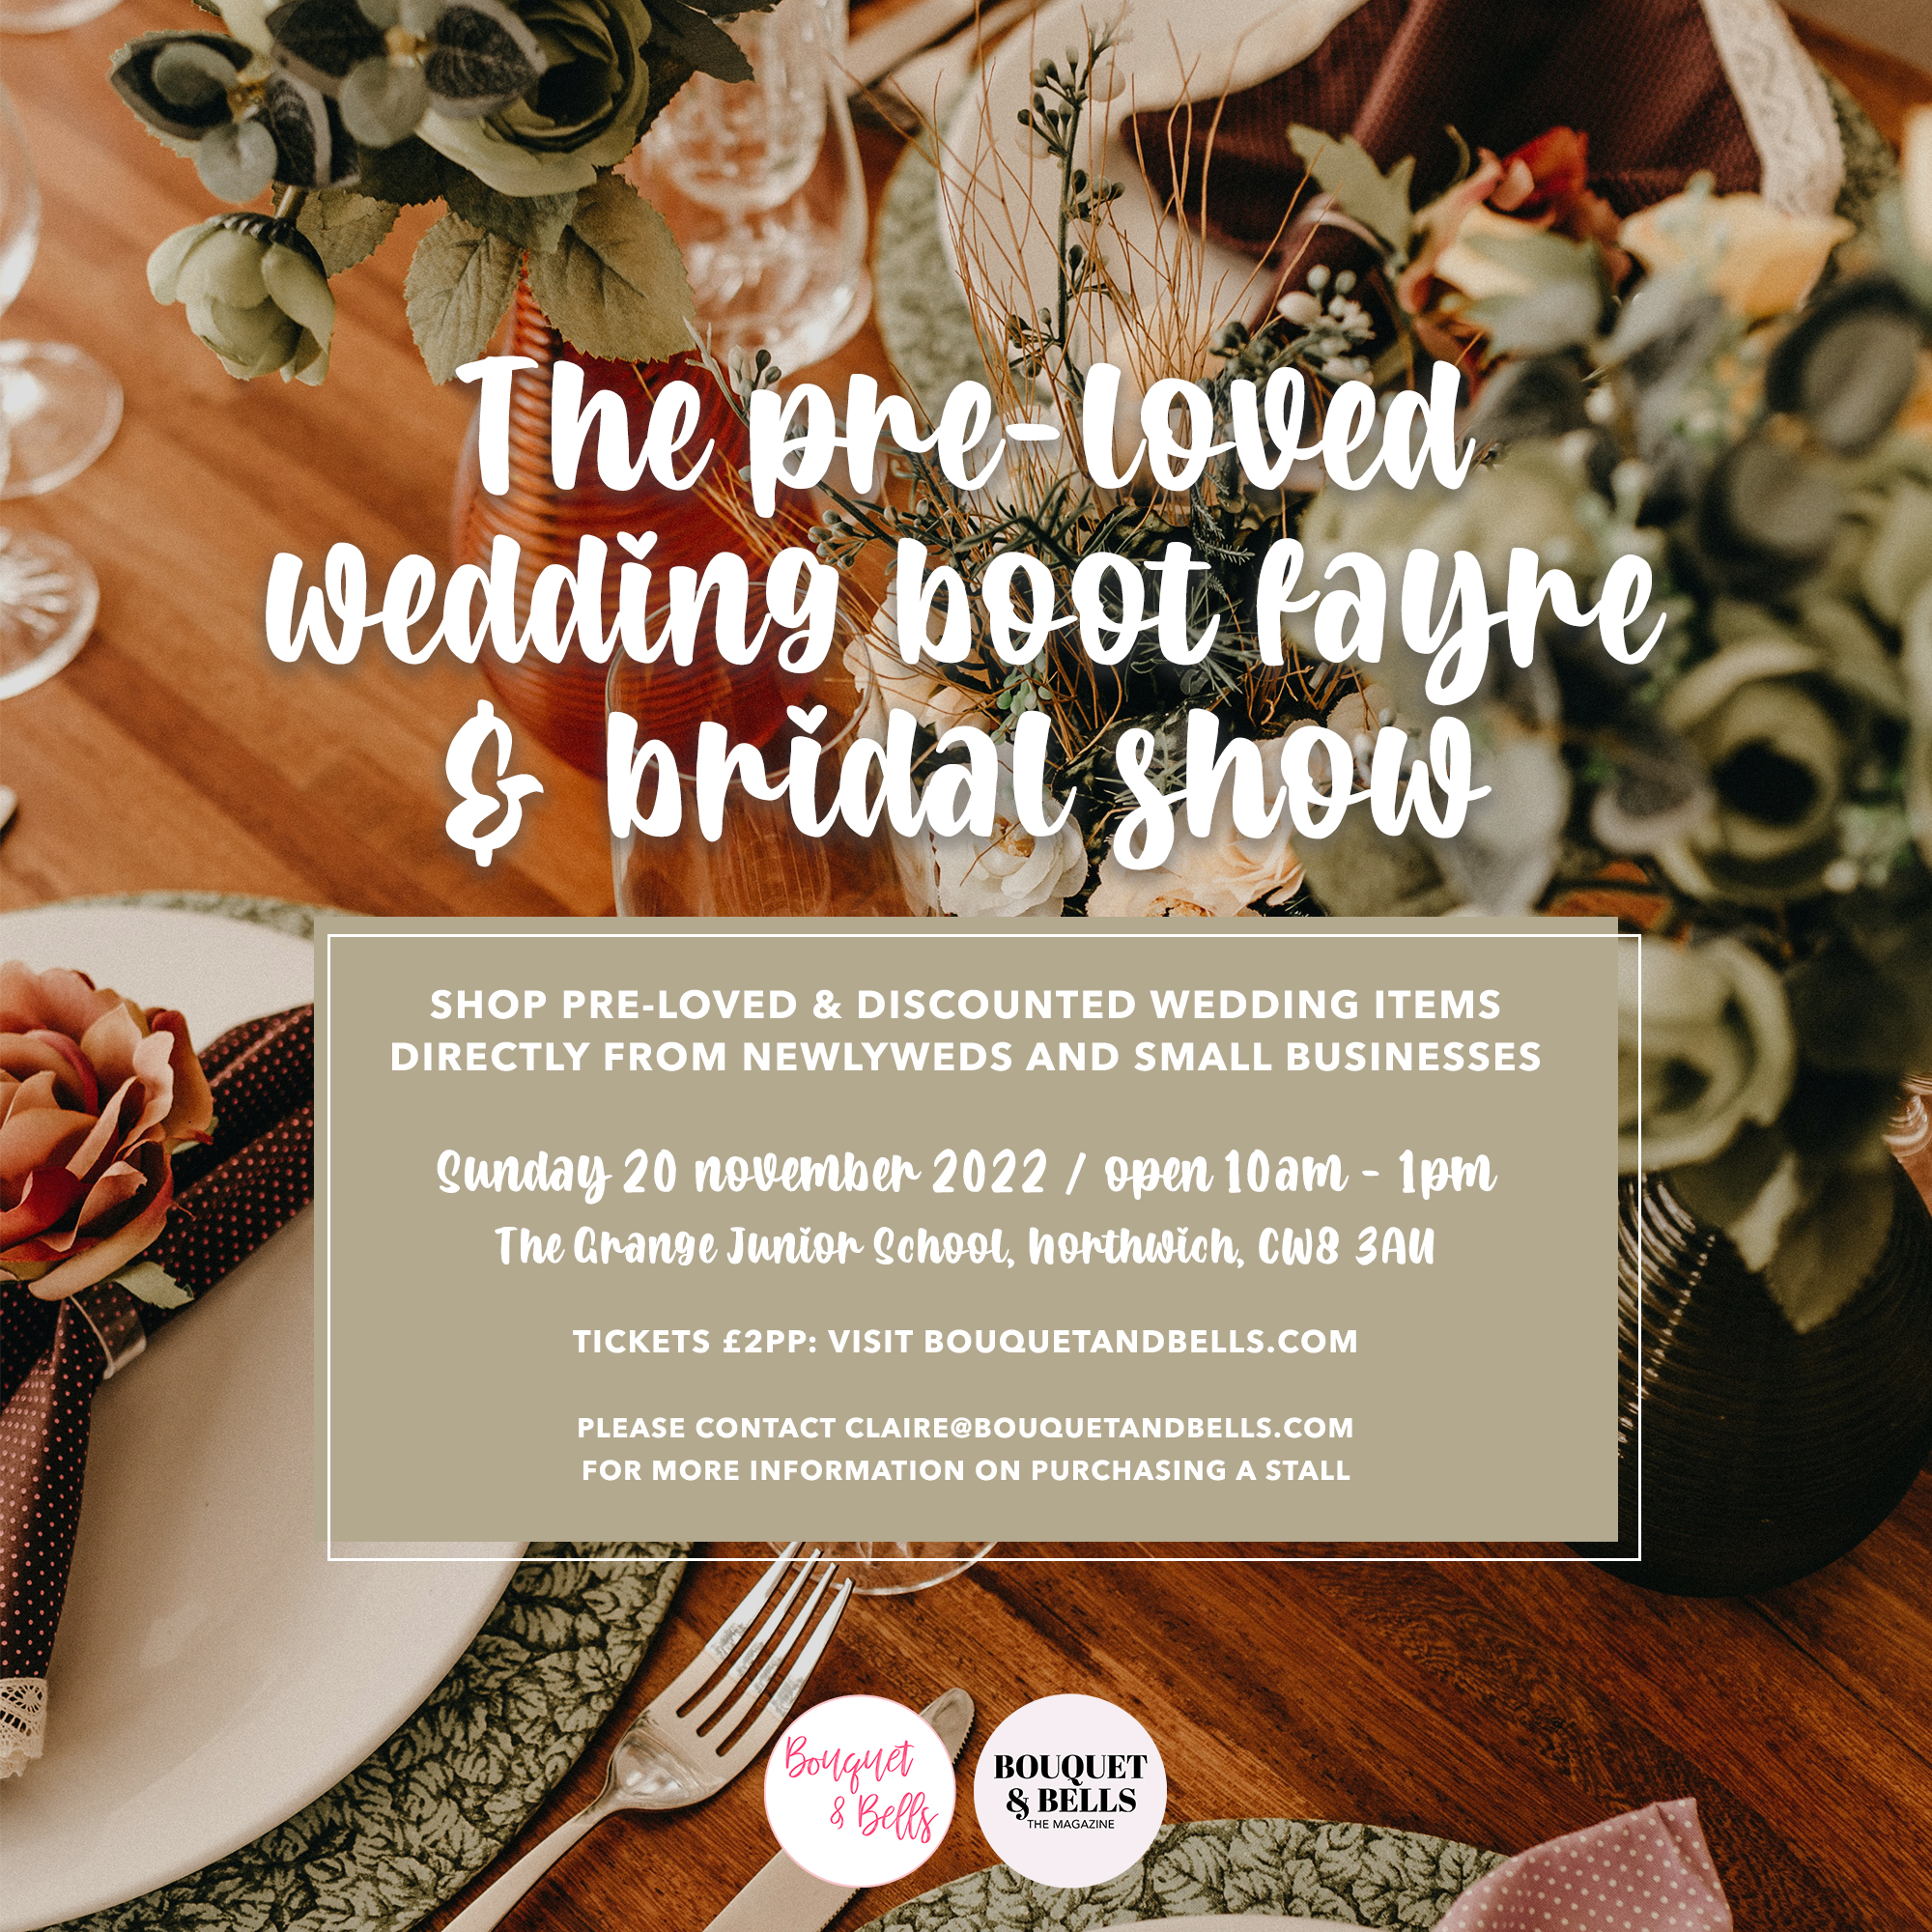 the-pre-loved-wedding-boot-fayre-and-bridal-show-wedding-fayre-fair-exhibition-discount-sale